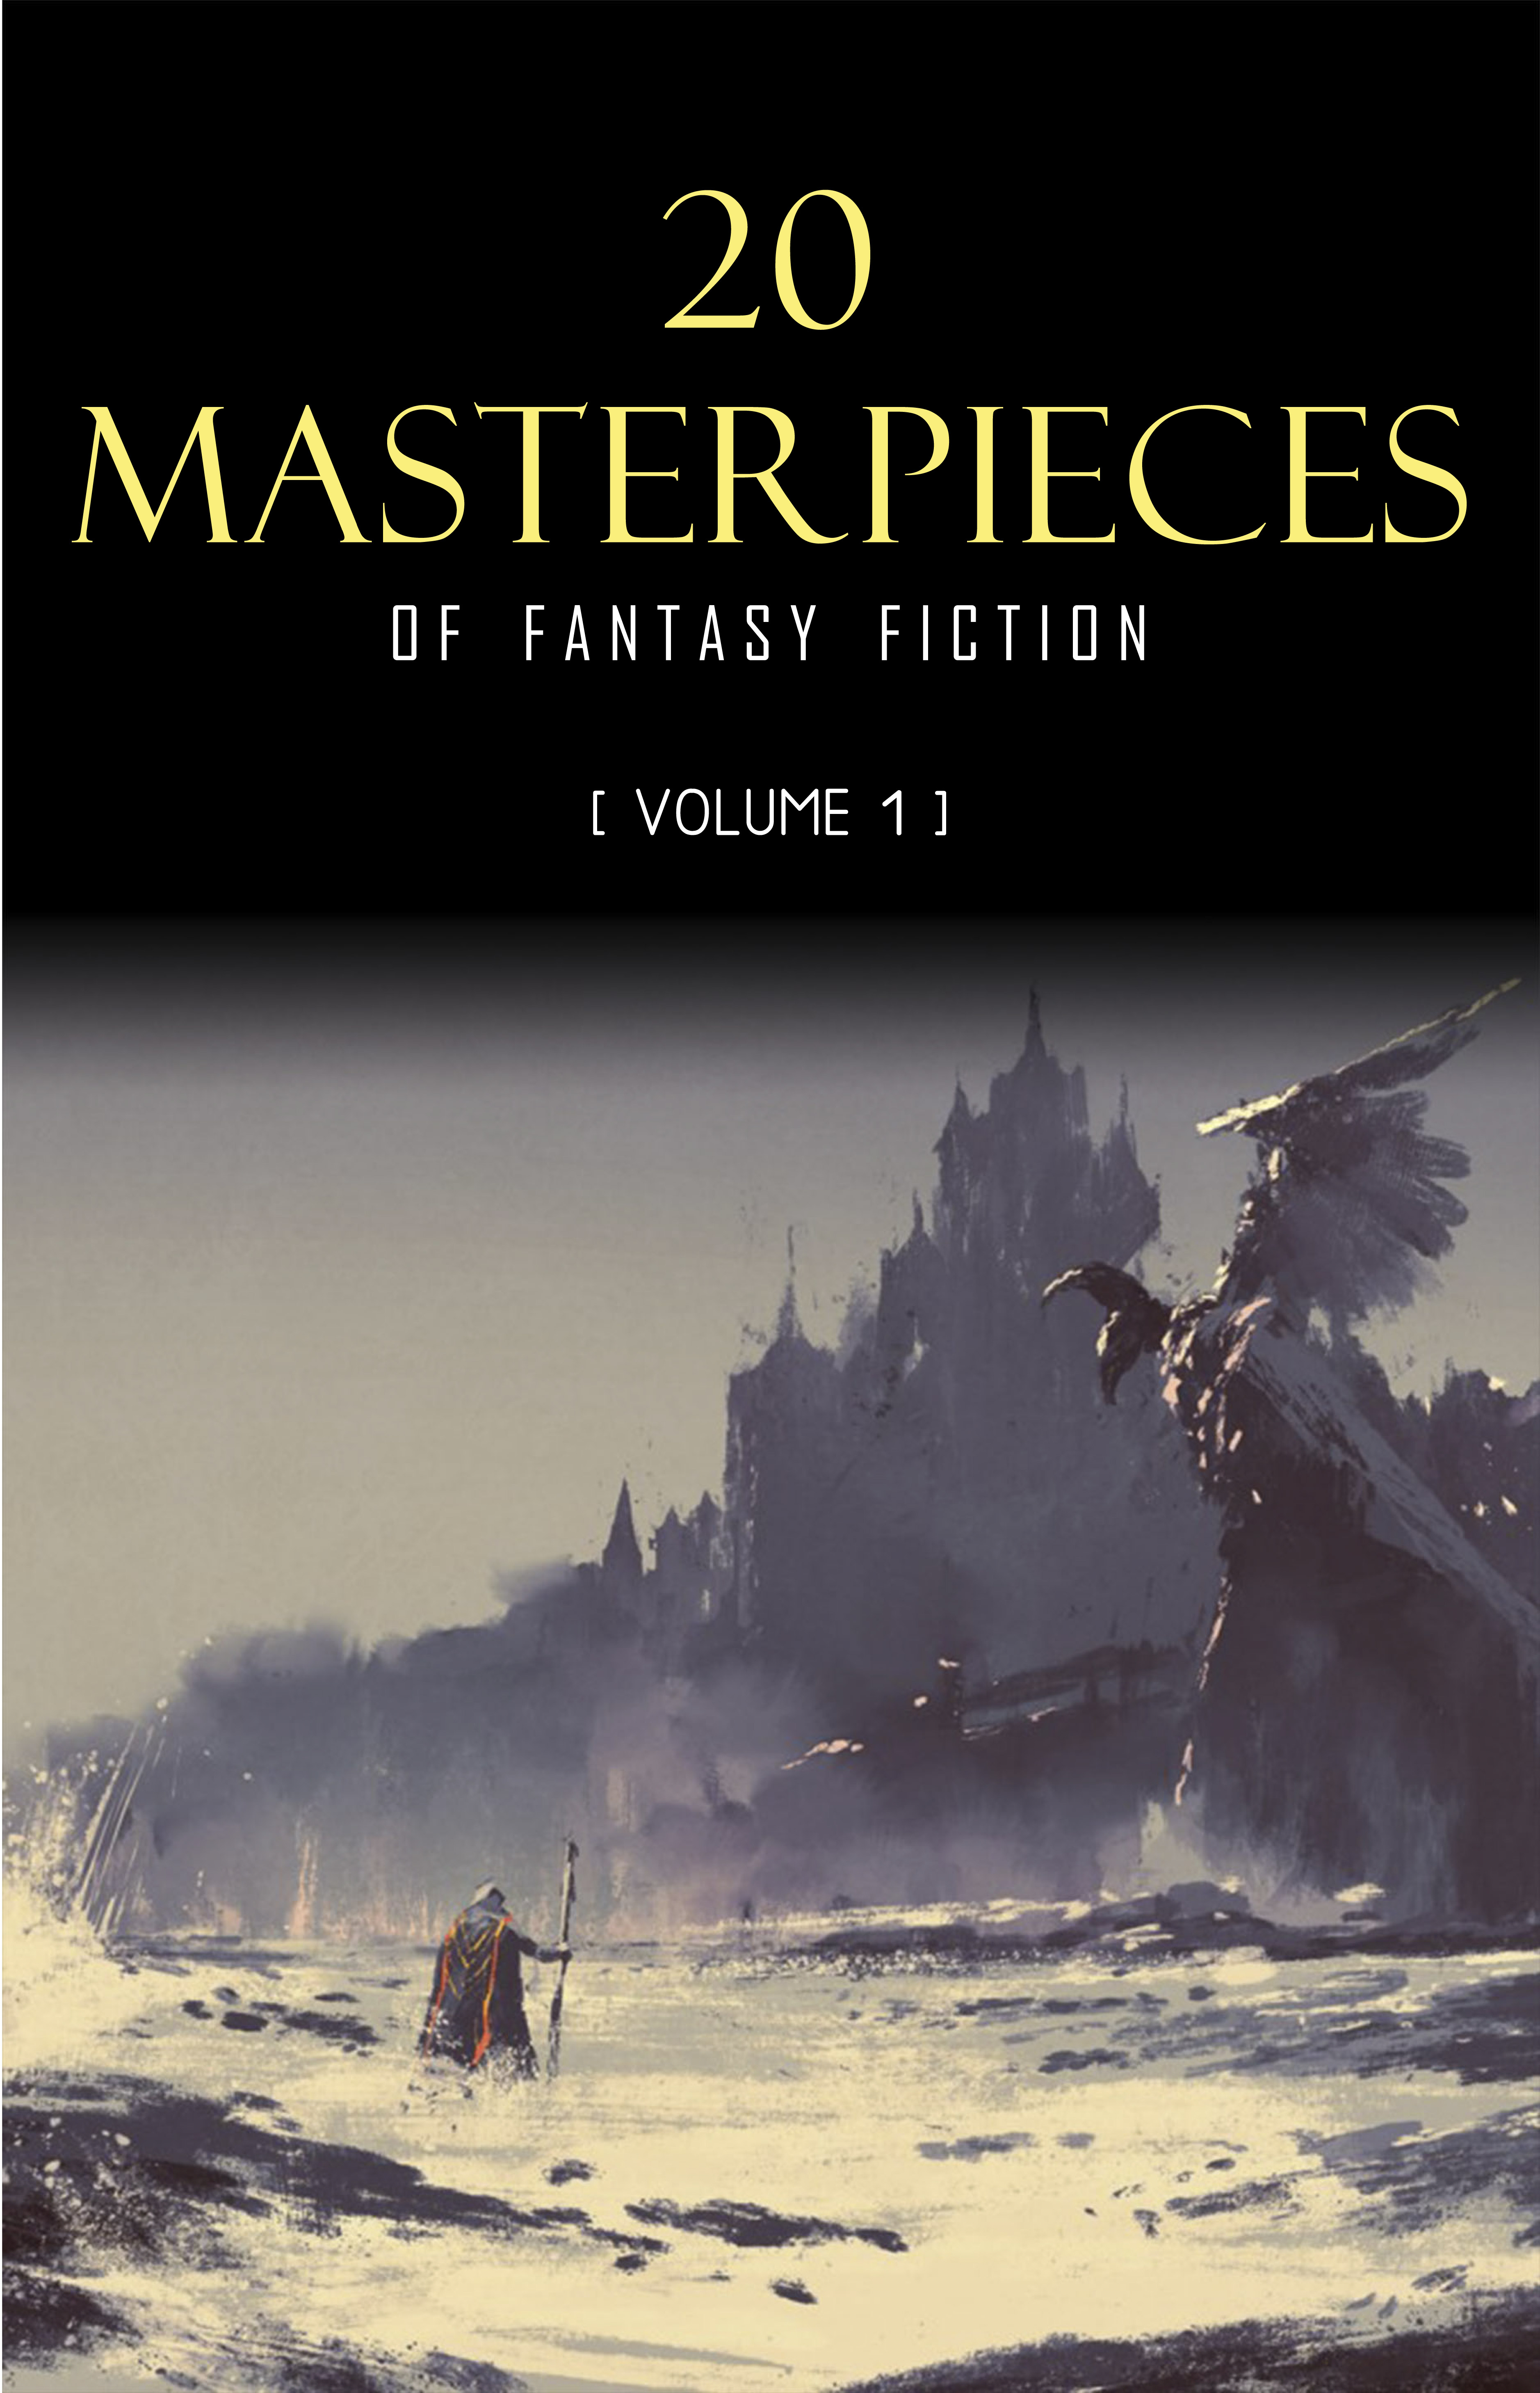 20 Masterpieces of Fantasy Fiction Vol. 1: Peter Pan, Alice in Wonderland, The Wonderful Wizard of Oz, Tarzan of the Apes......